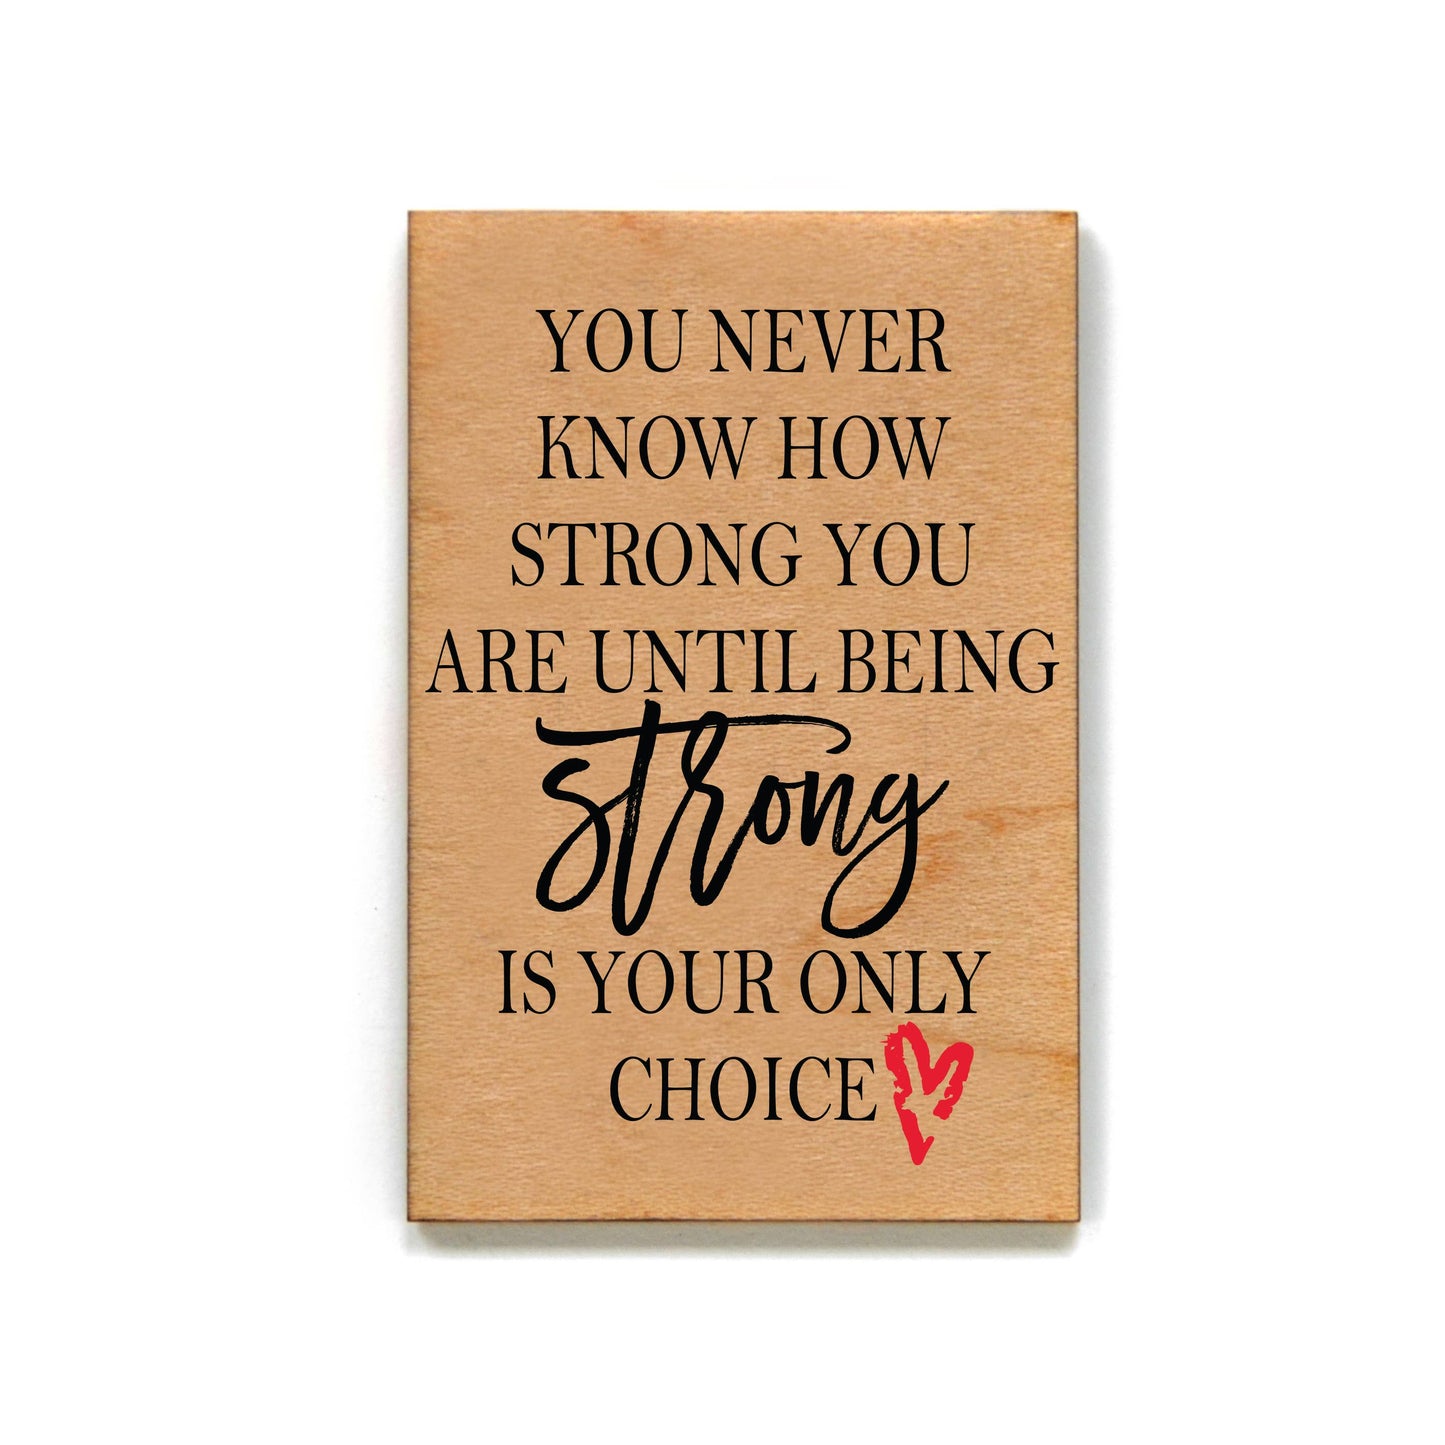 Driftless Studios - You Never Know How Strong You Are Wooden Magnet With Heart